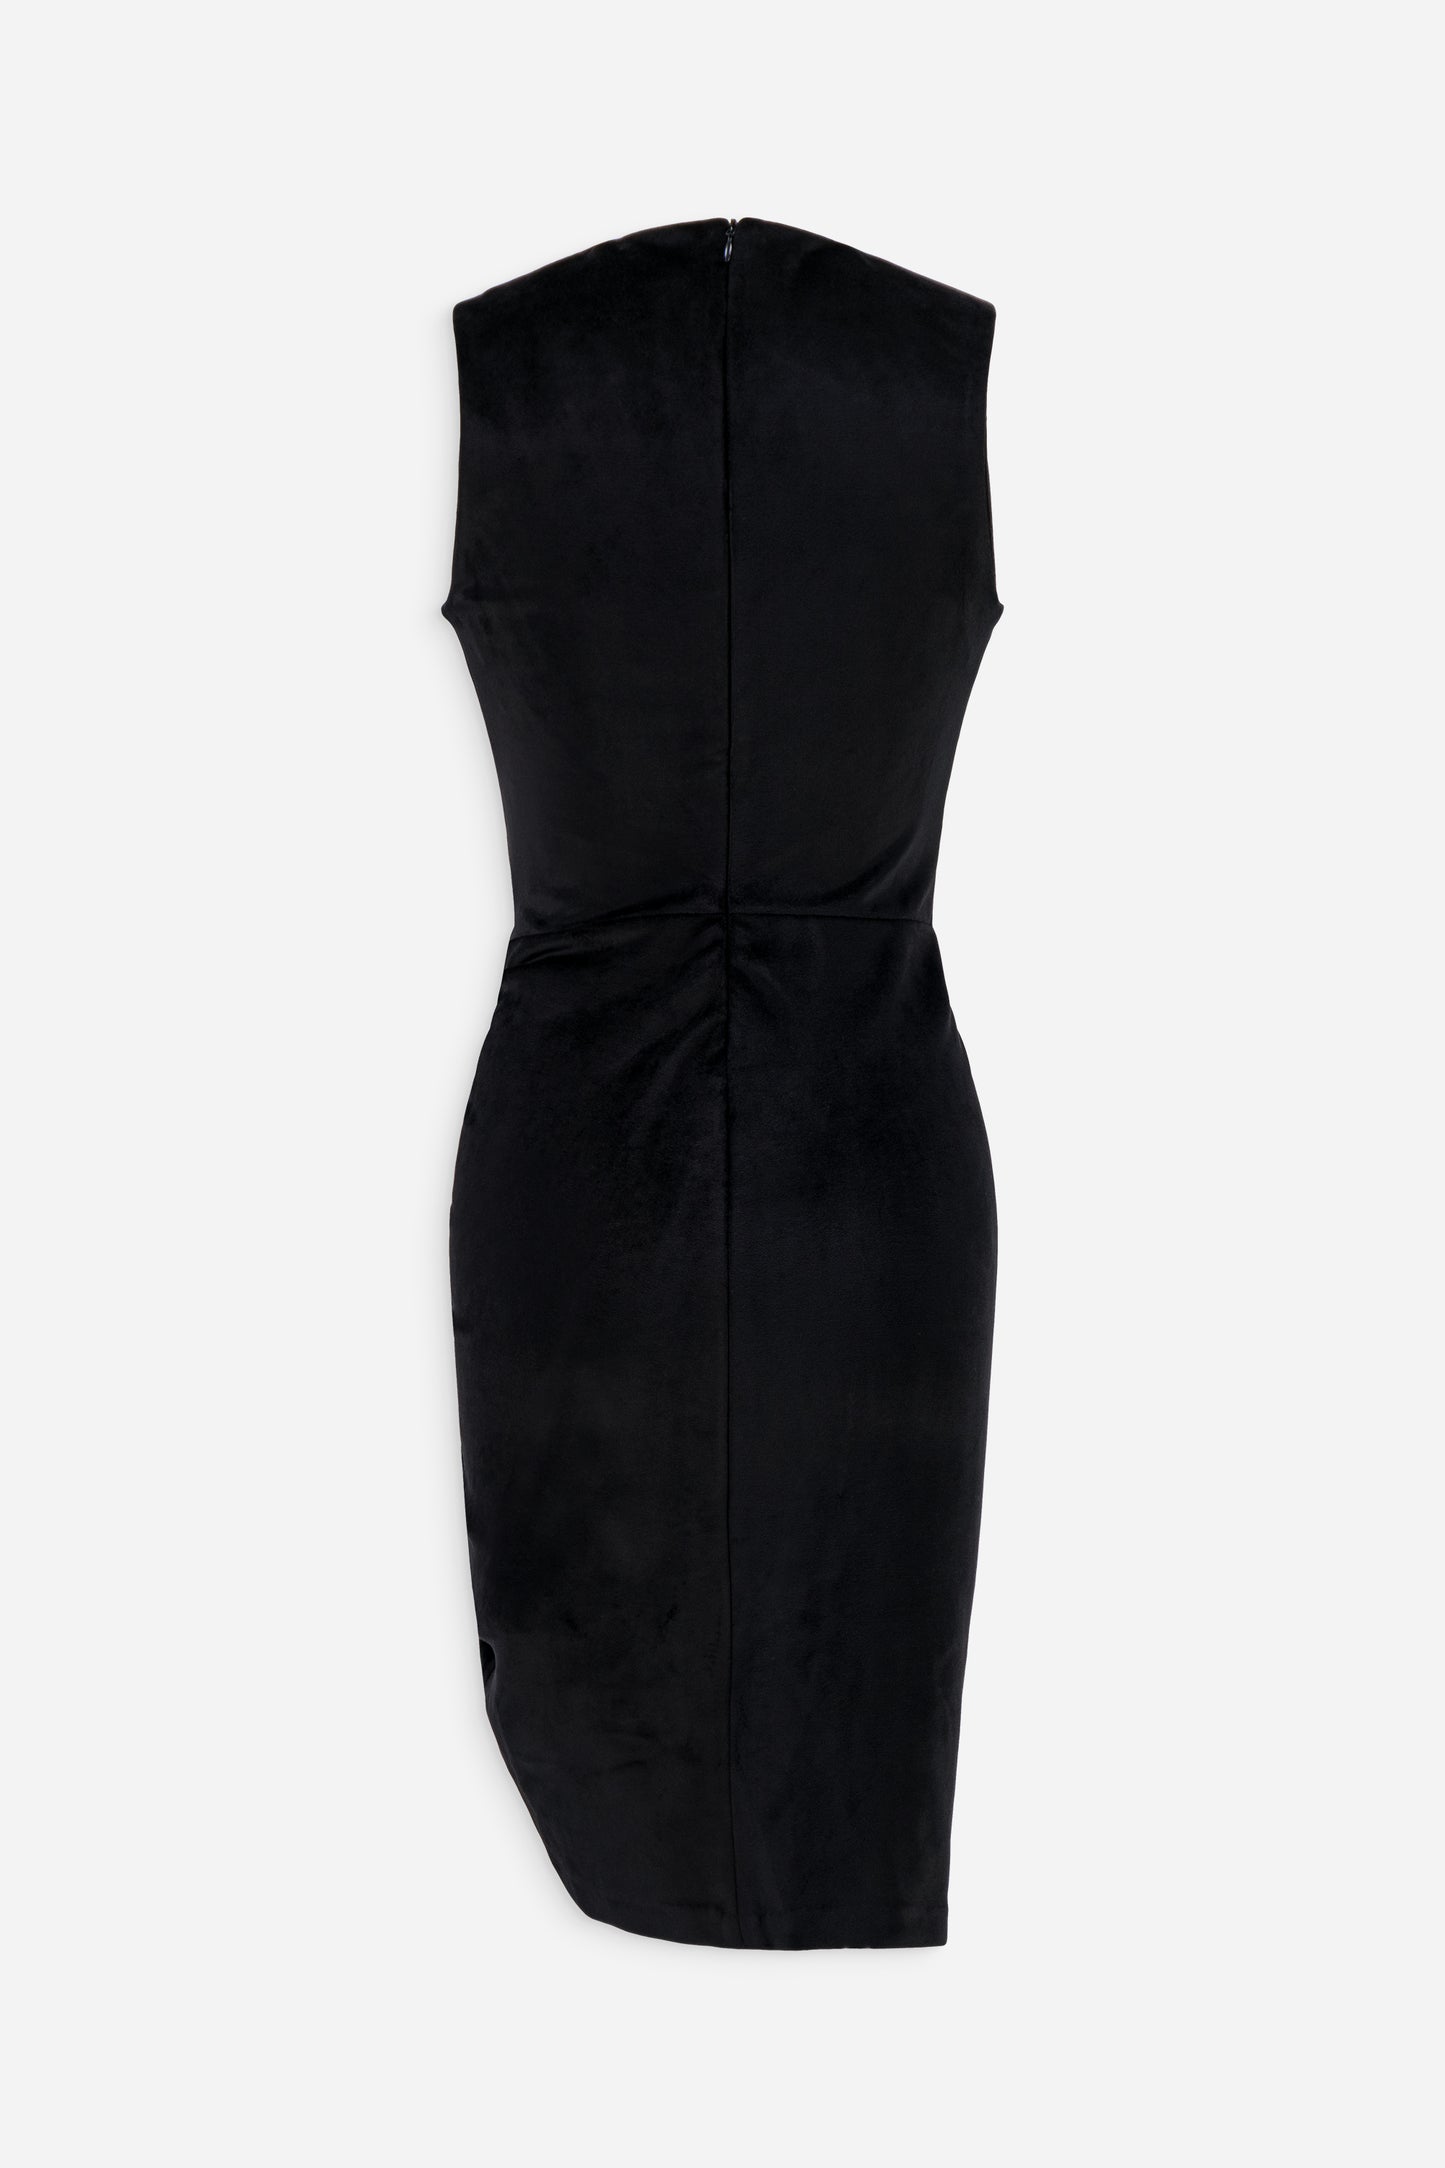 Ruched sleeveless dress - Exclusive